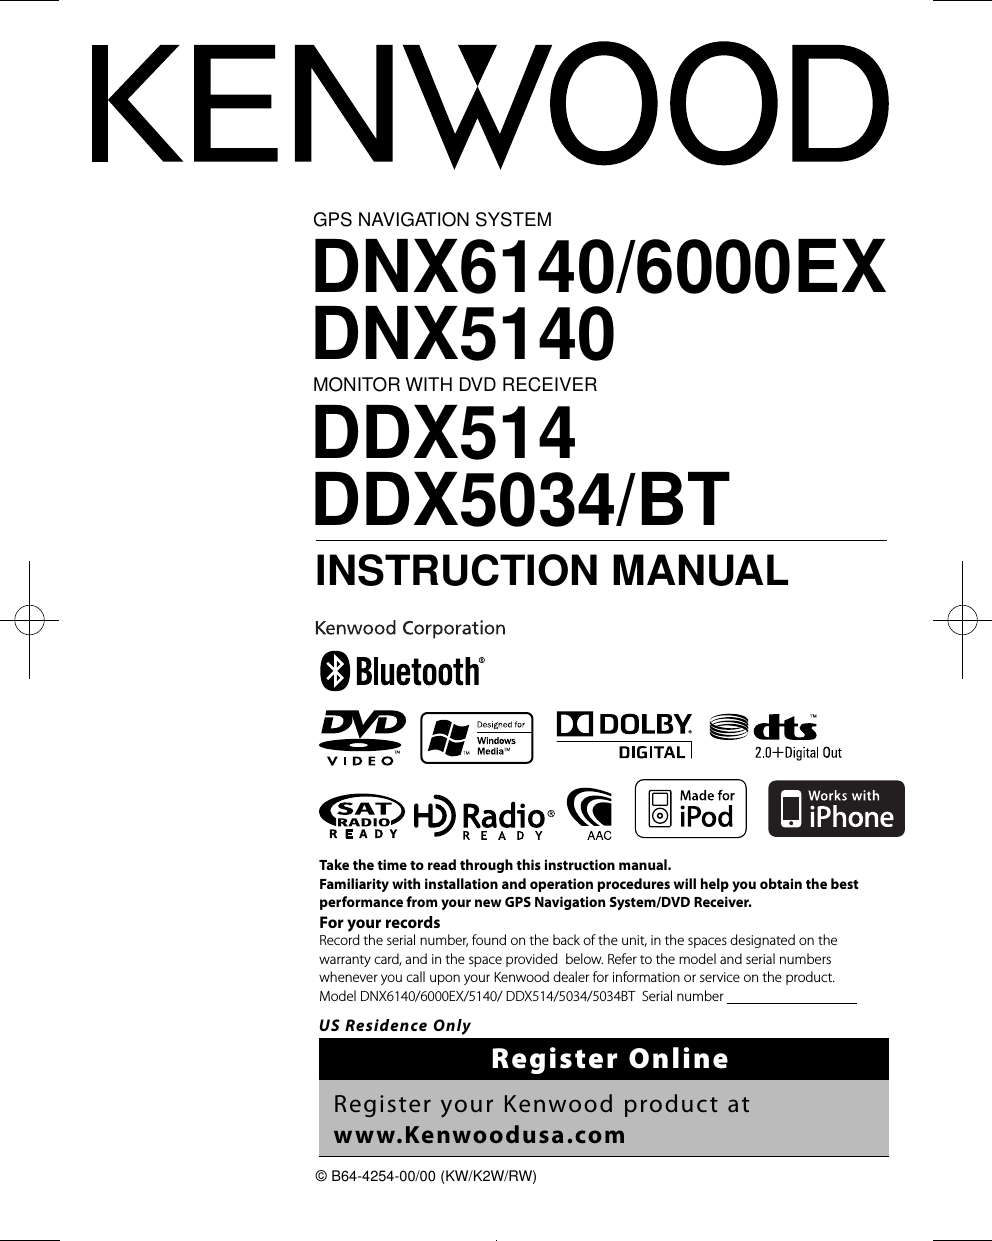 GPS NAVIGATION SYSTEMDNX6140/6000EXDNX5140MONITOR WITH DVD RECEIVERDDX514DDX5034/BT INSTRUCTION MANUAL© B64-4254-00/00 (KW/K2W/RW)Take the time to read through this instruction manual.Familiarity with installation and operation procedures will help you obtain the best performance from your new GPS Navigation System/DVD Receiver.For your recordsRecord the serial number, found on the back of the unit, in the spaces designated on the warranty card, and in the space provided  below. Refer to the model and serial numbers whenever you call upon your Kenwood dealer for information or service on the product.Model DNX6140/6000EX/5140/ DDX514/5034/5034BT  Serial number                                      US Residence OnlyRegister OnlineRegister your Kenwood product at www.Kenwoodusa.comB64-4254-00_00.indb   1 08.10.16   10:47:00 AM